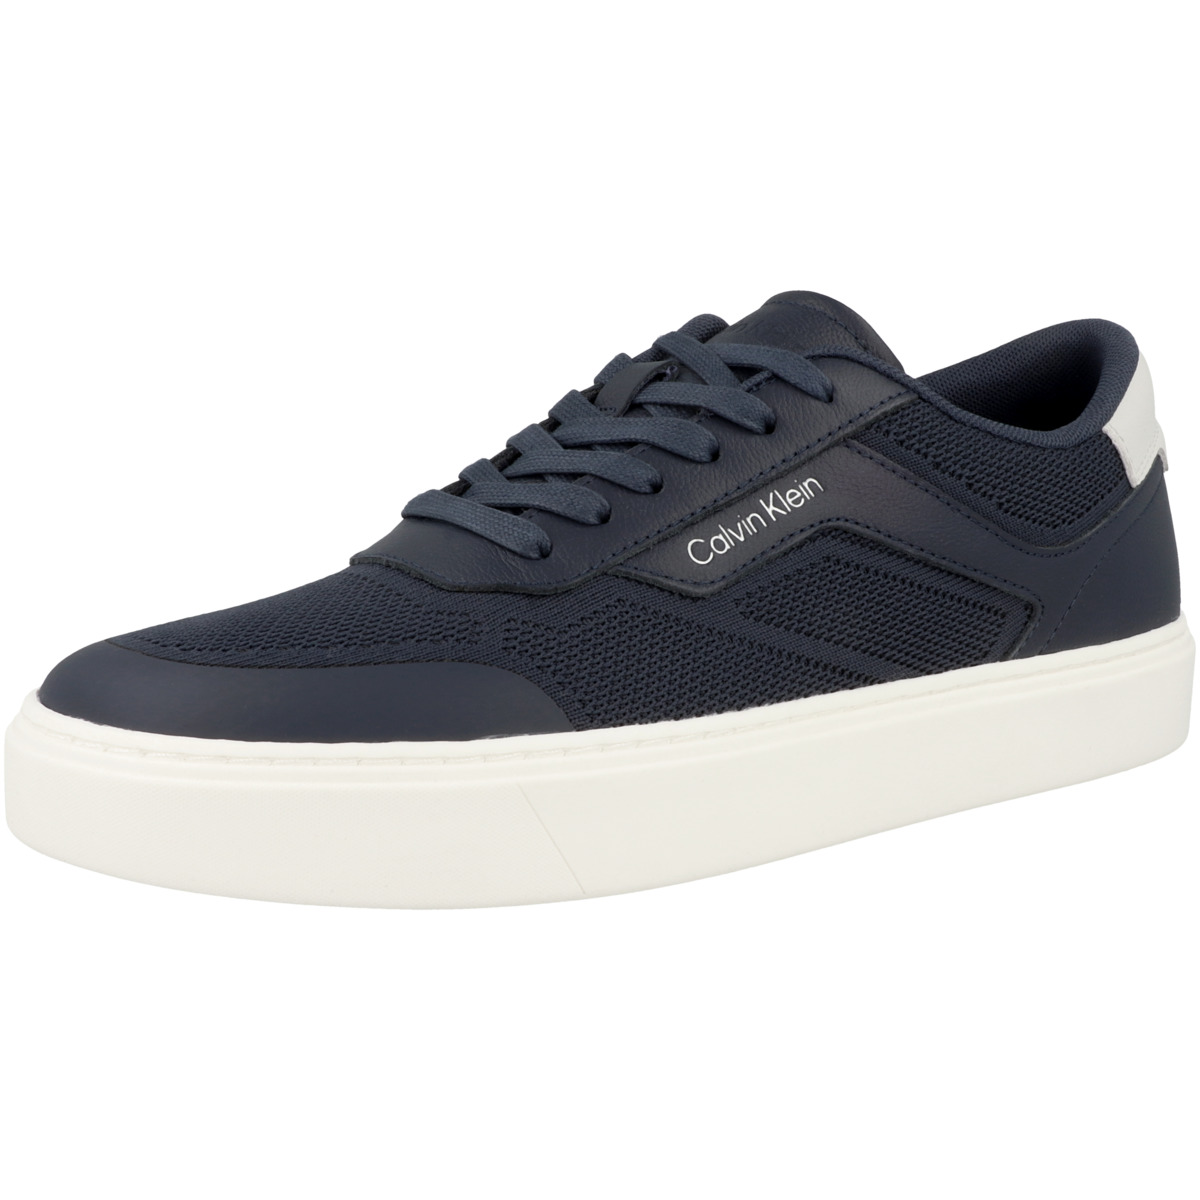 Calvin Klein Low Top Lace Up Knit Sneaker low